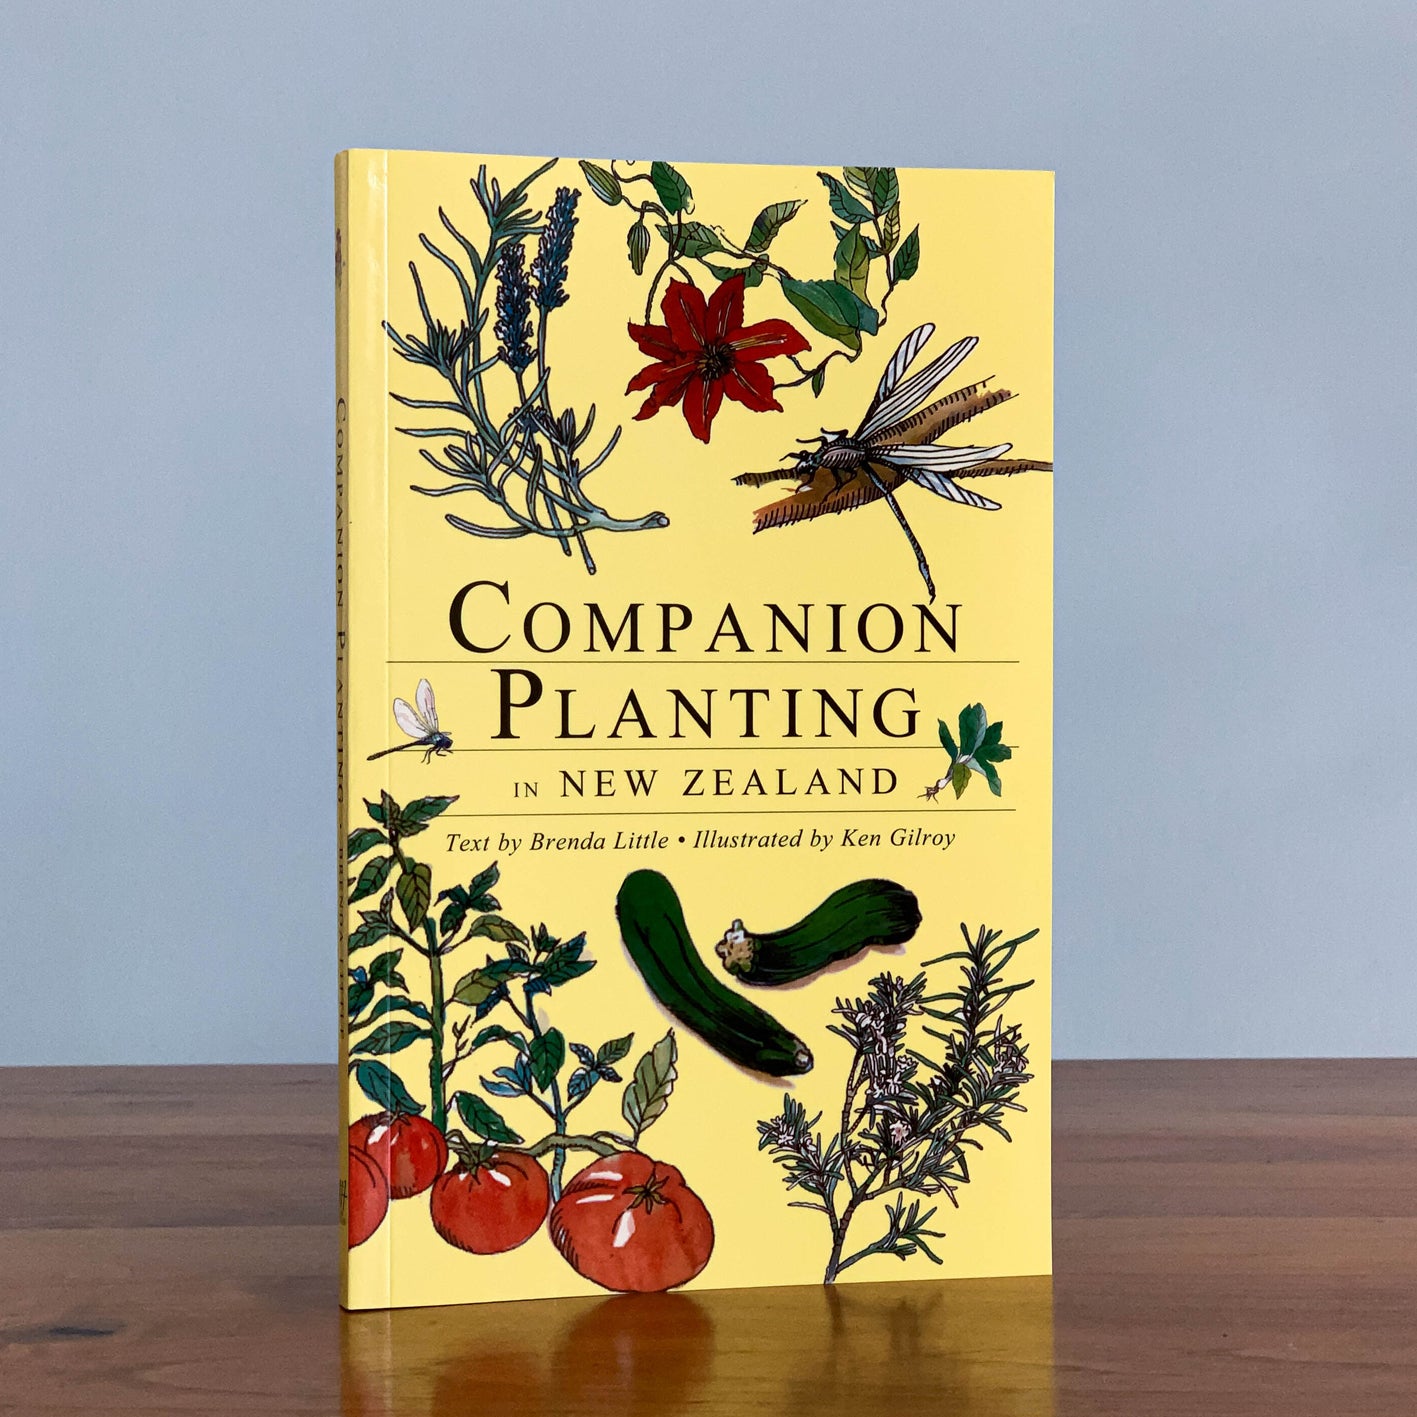 COMPANION PLANTING IN NEW ZEALAND